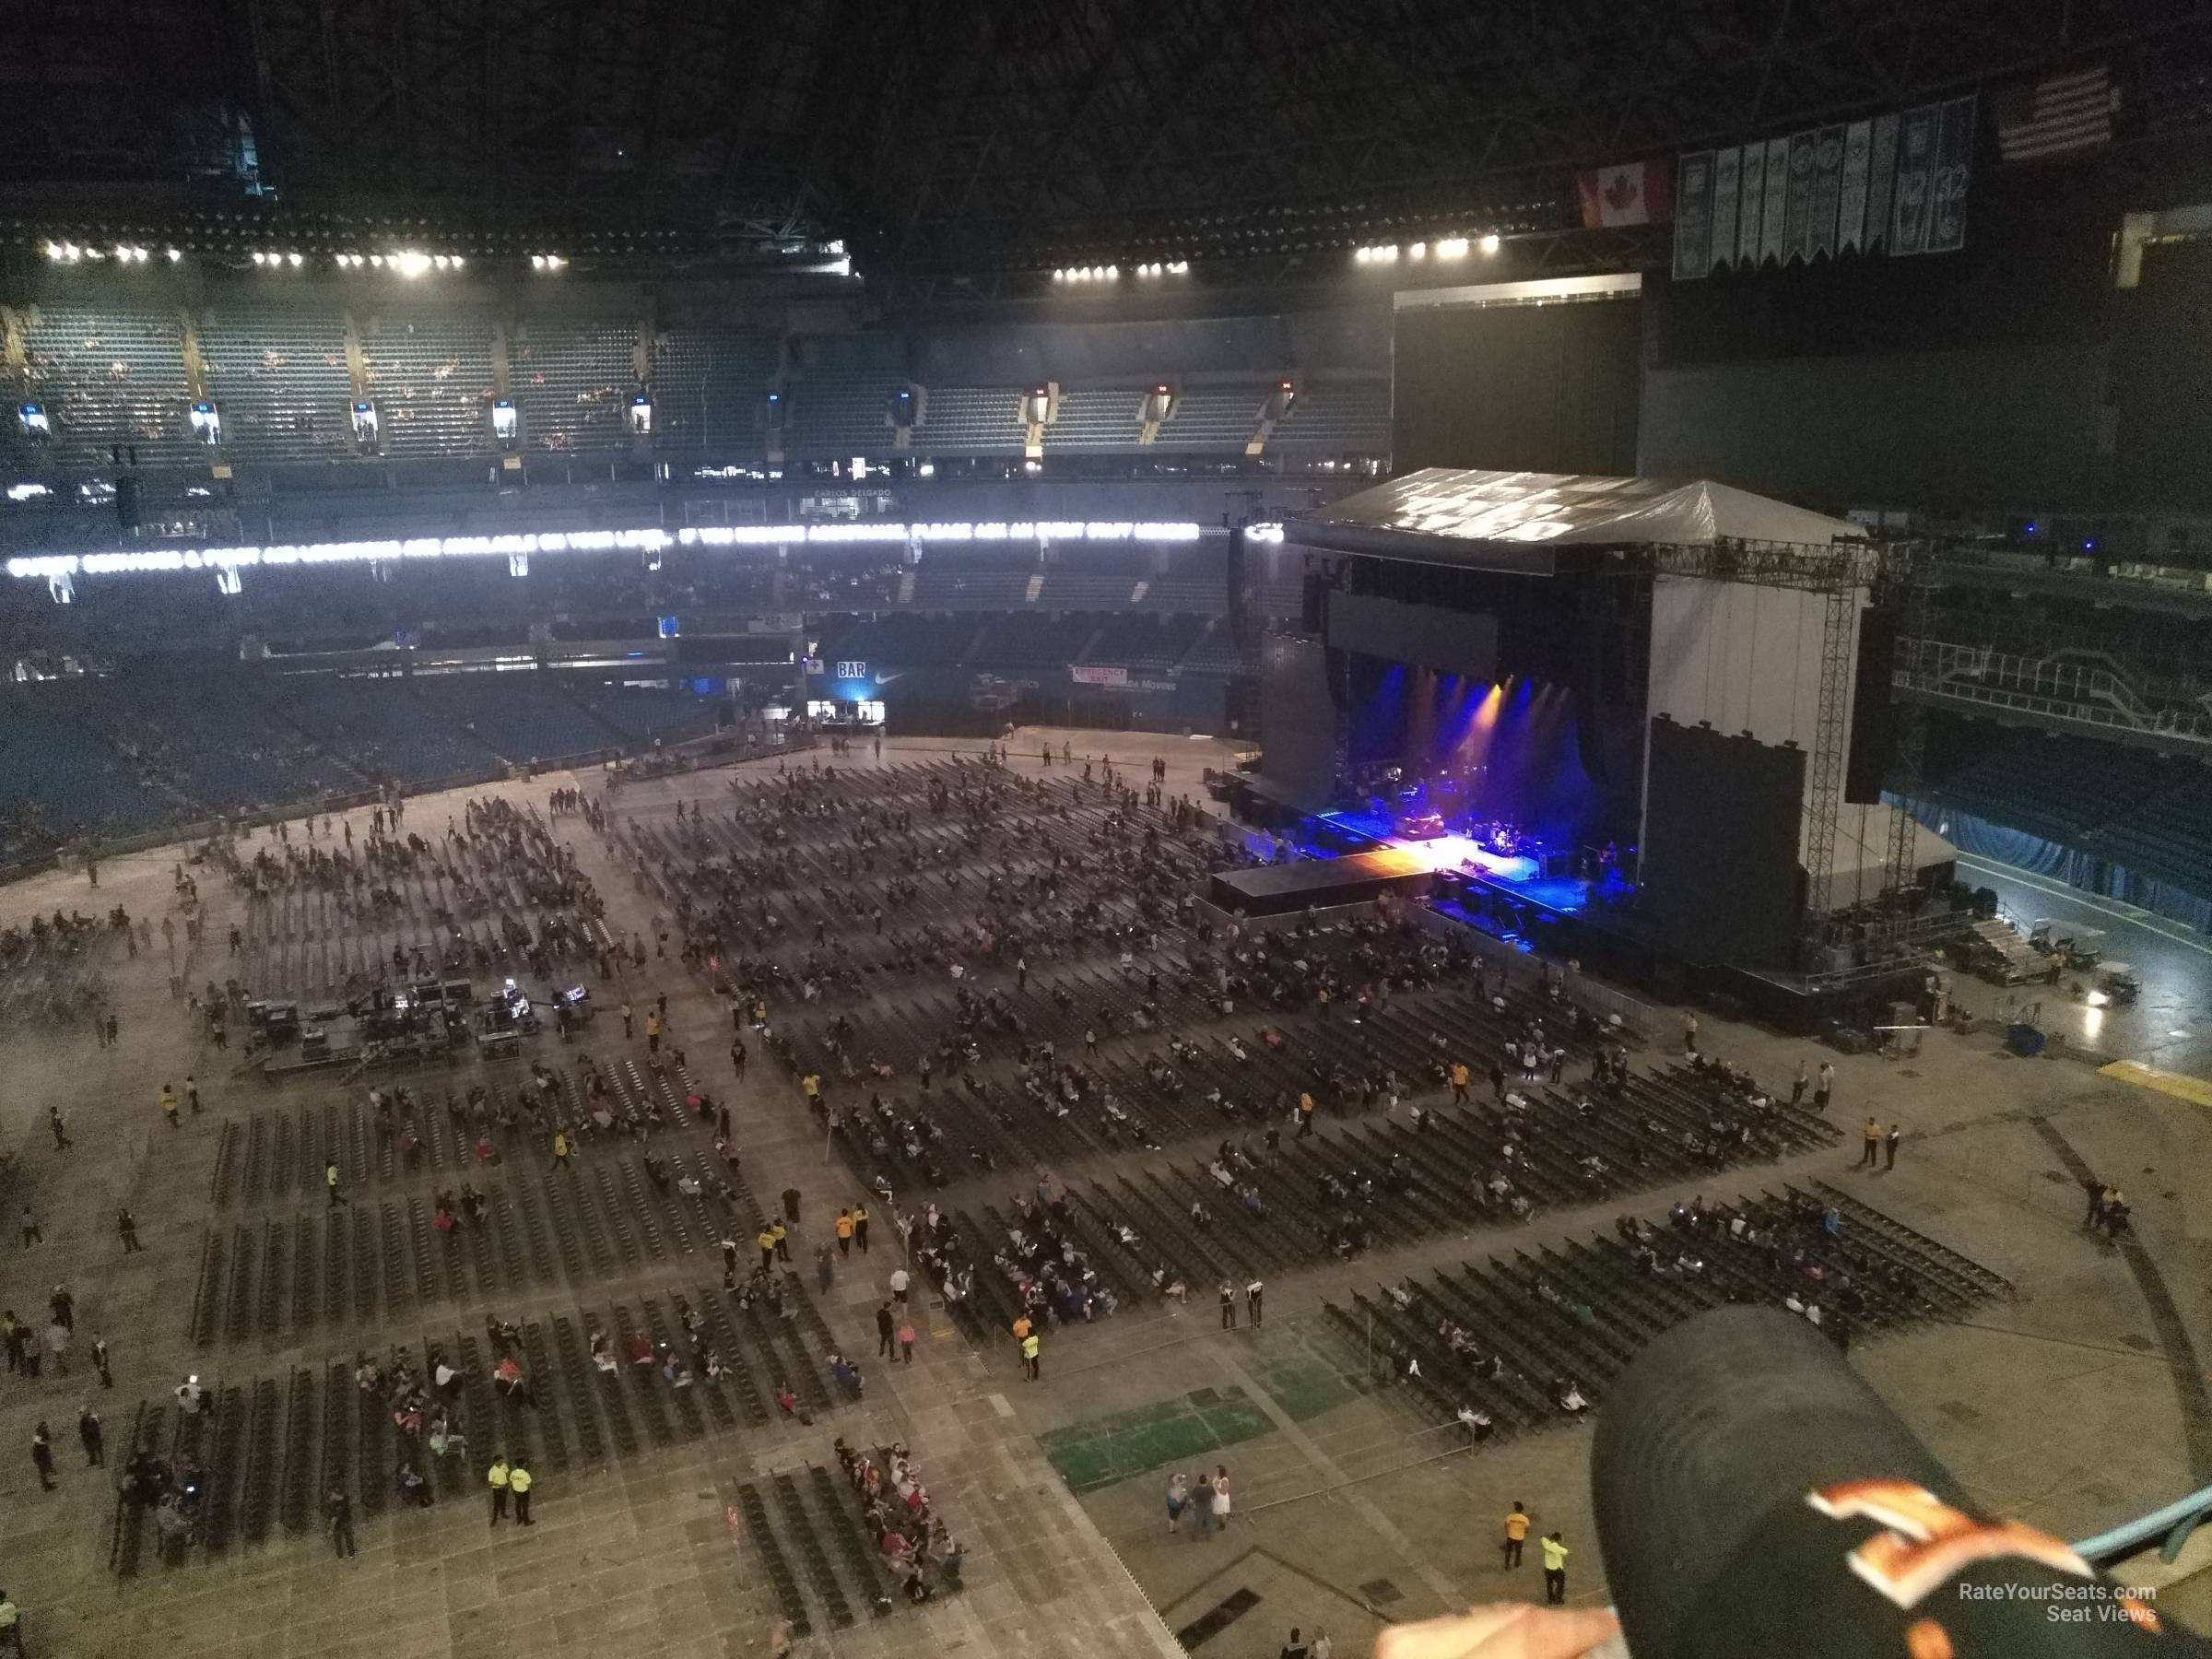 section 512, row 5 seat view  for concert - rogers centre